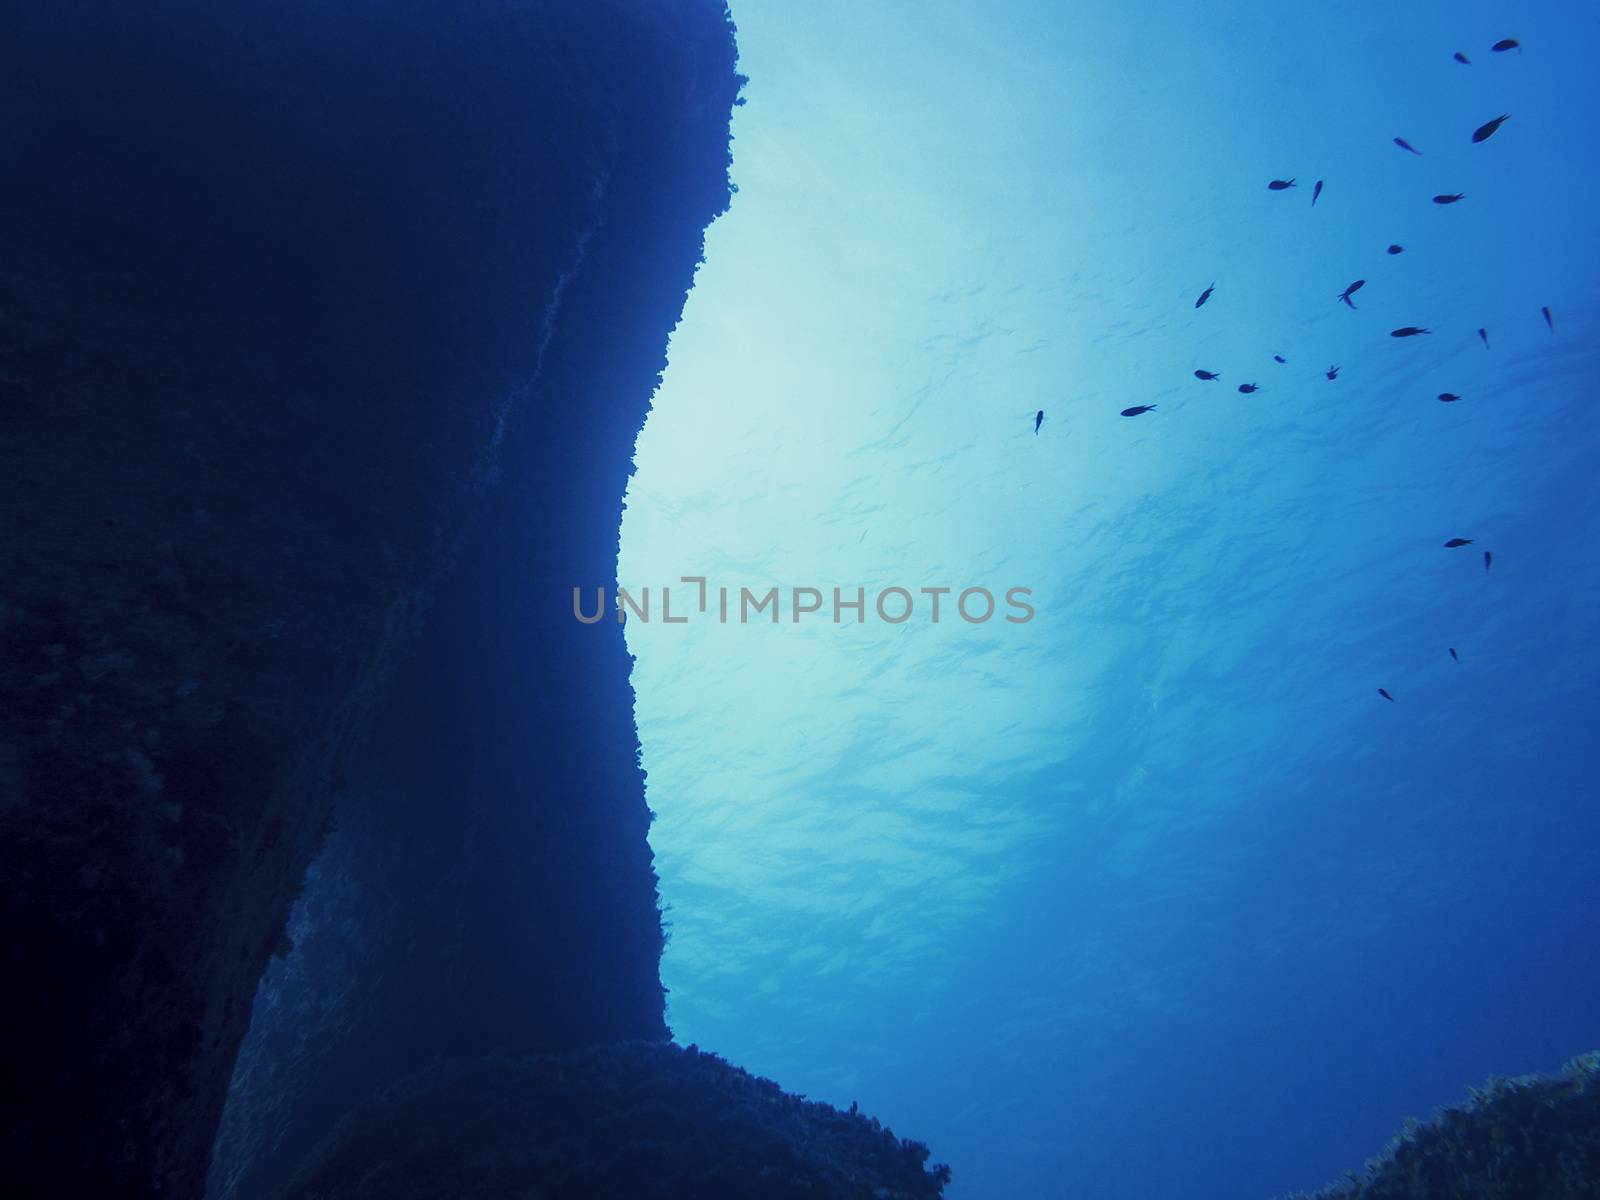 underwater background with small fish and rocks by raulmelldo